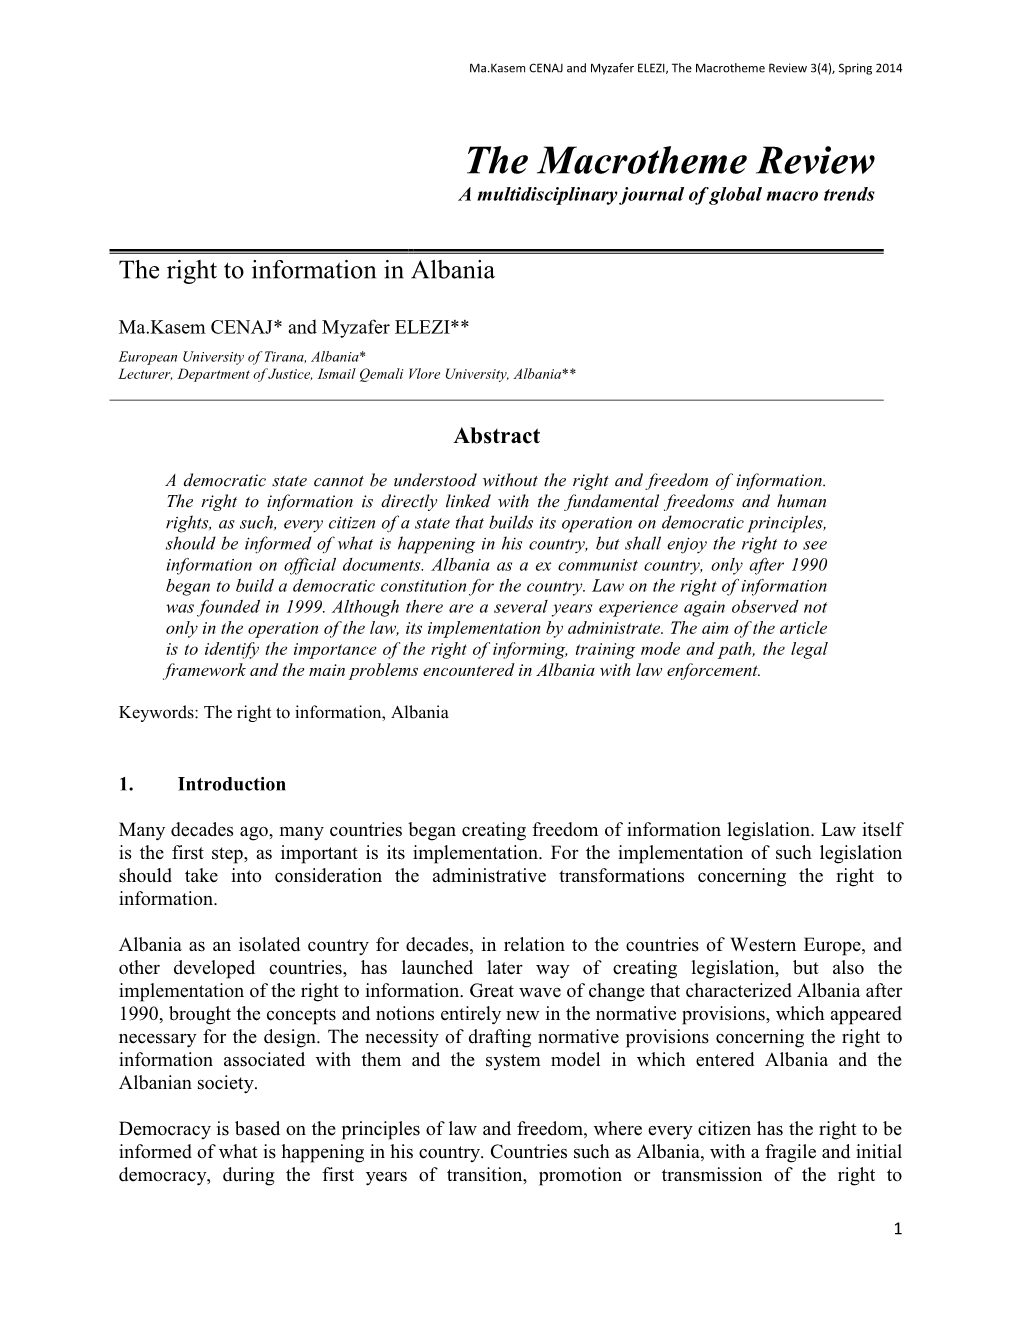 The Macrotheme Review 3(4), Spring 2014